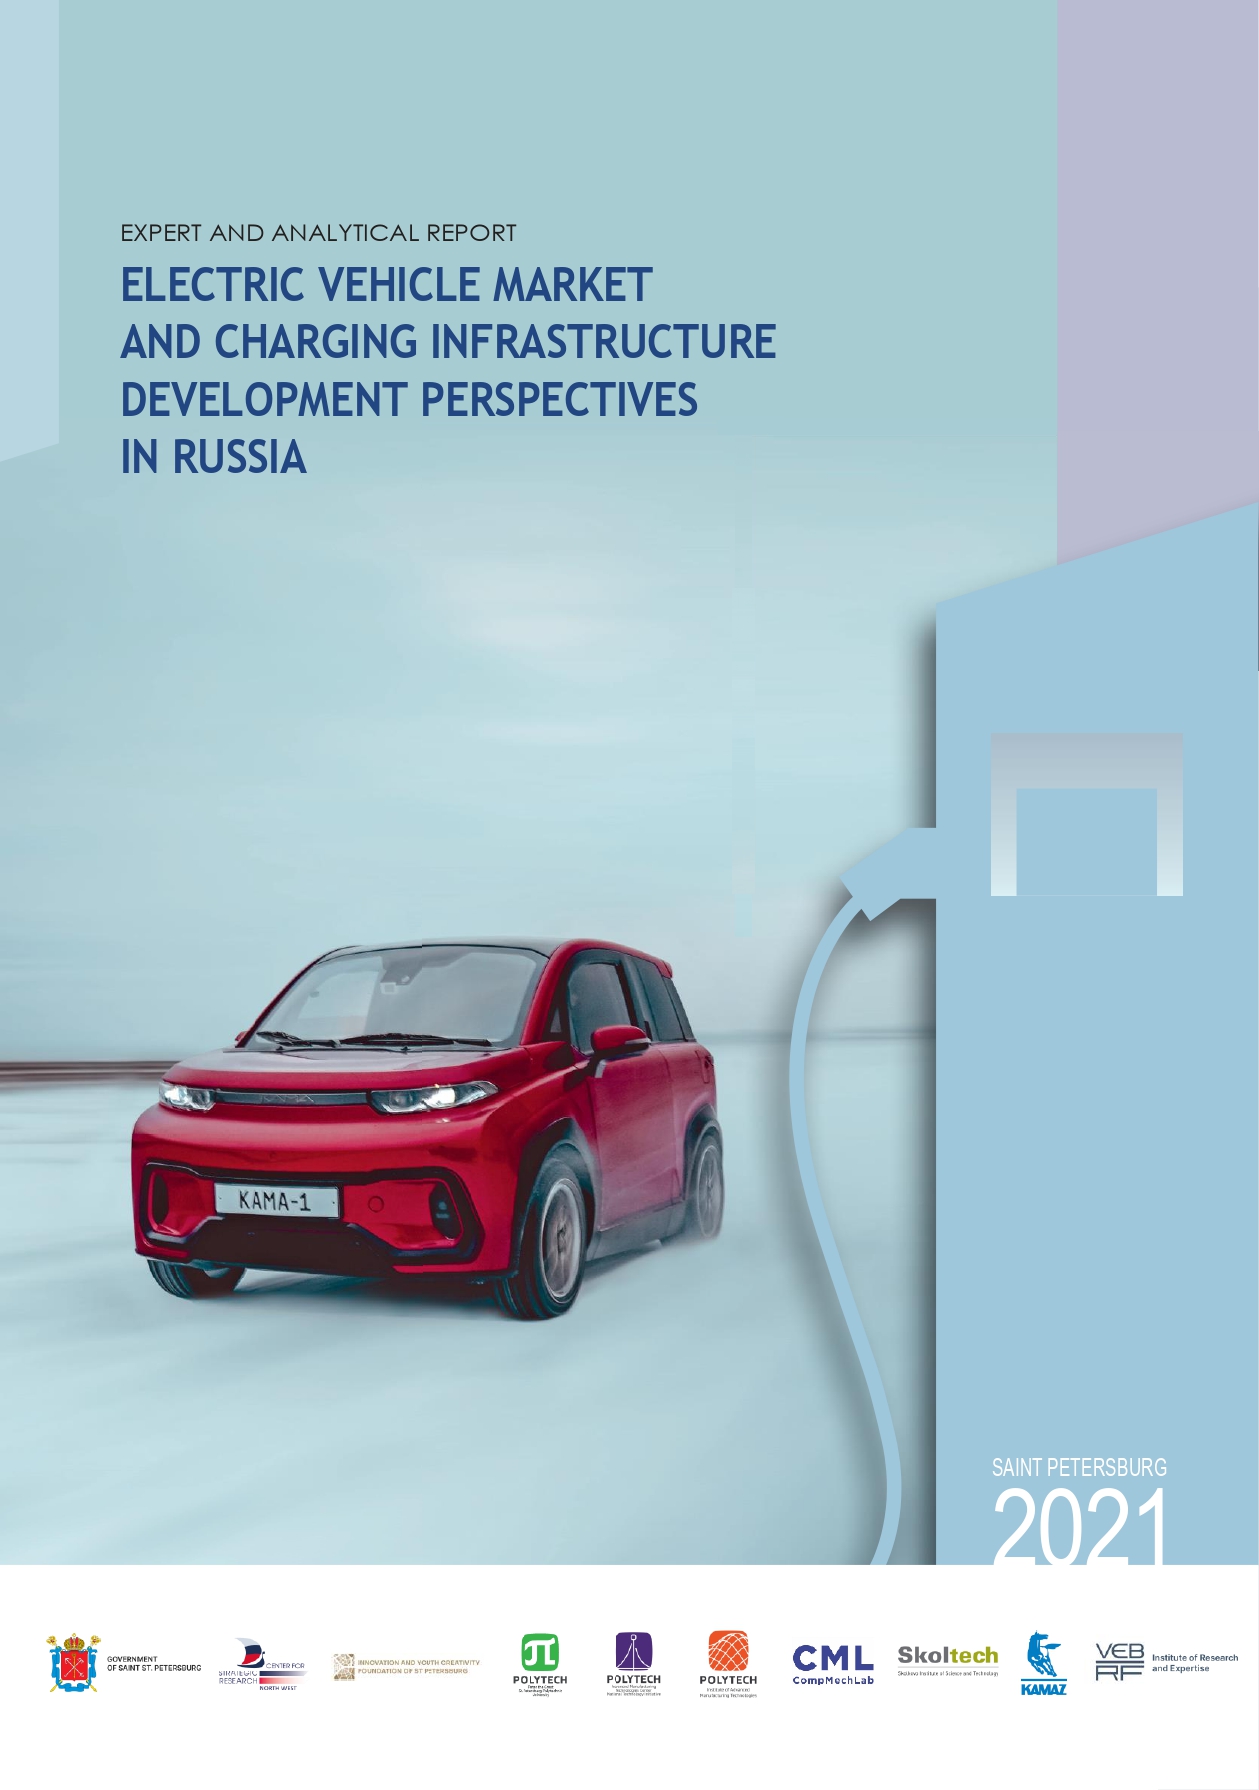 Electric vehicle market and charging infrastructure development perspectives in Russia